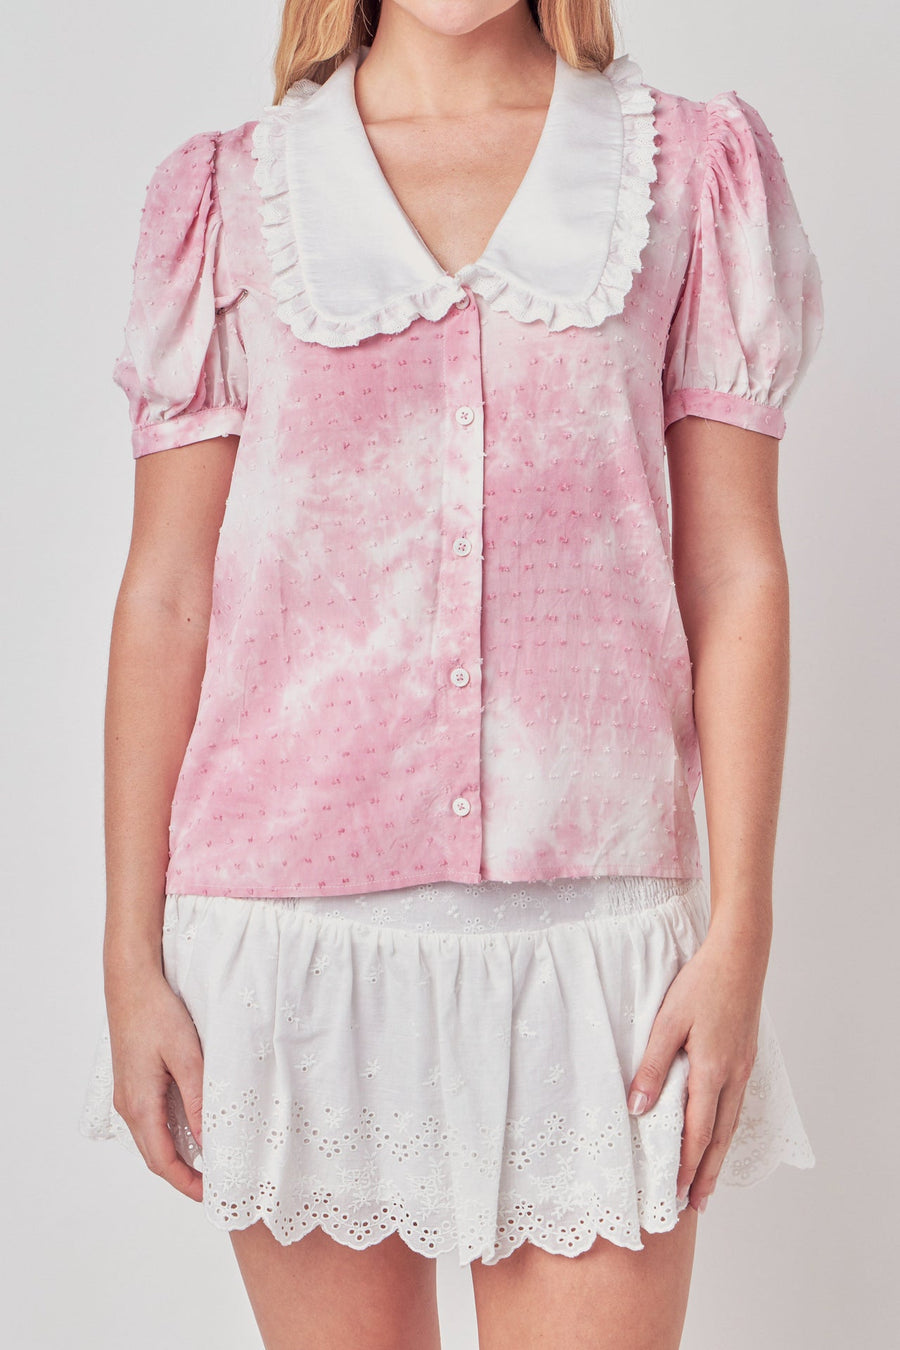 FREE THE ROSES-Swiss Dot Tie Dye Ruffle Collared Puff Sleeve Blouse-SHIRTS & BLOUSES available at Objectrare